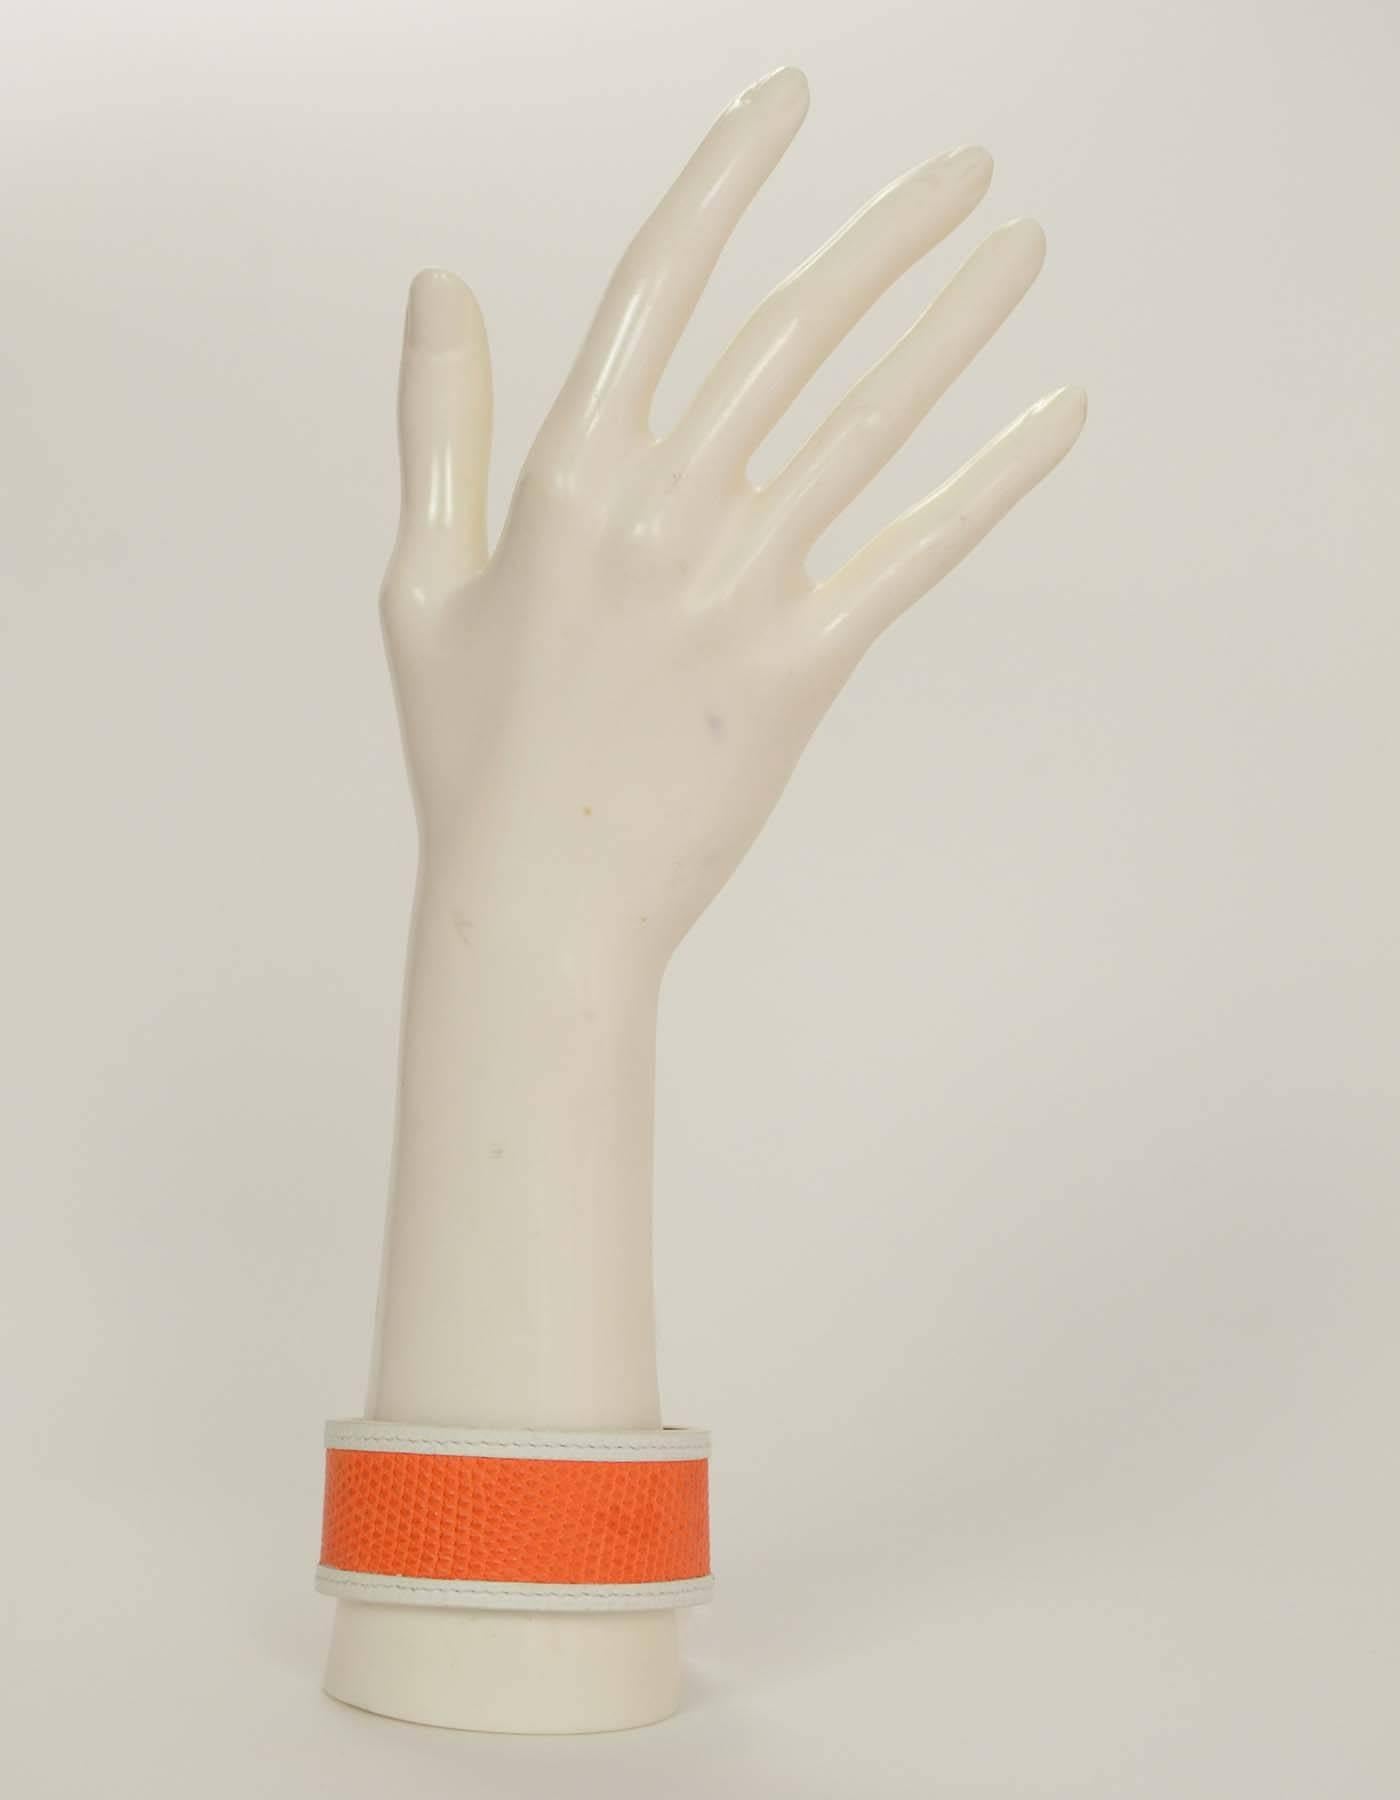 Hermes Orange and White Lizard Bangle

Stamp: Hermes
Closure: None
Color: White and orange
Materials: Leather and lizard
Overall Condition: Very good pre-owned condition with the exception of some discoloration